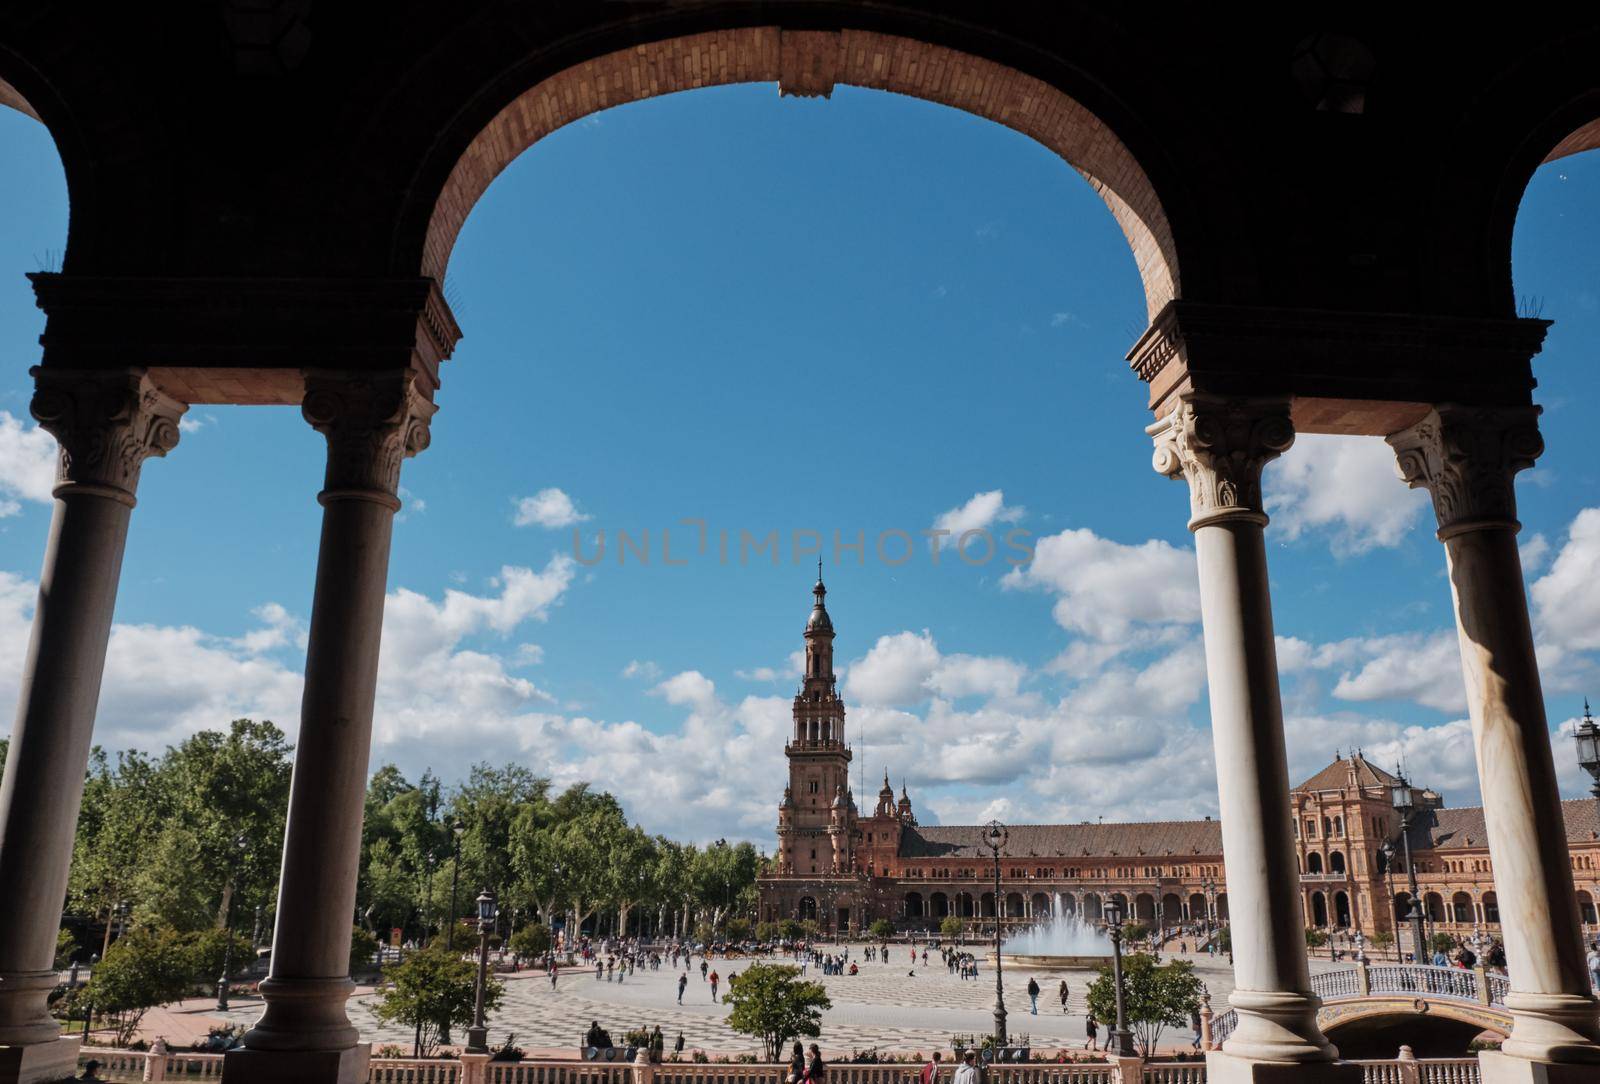 view of Seville's main square Plaza de Espana from arch covered walkway Spain by Sandronize